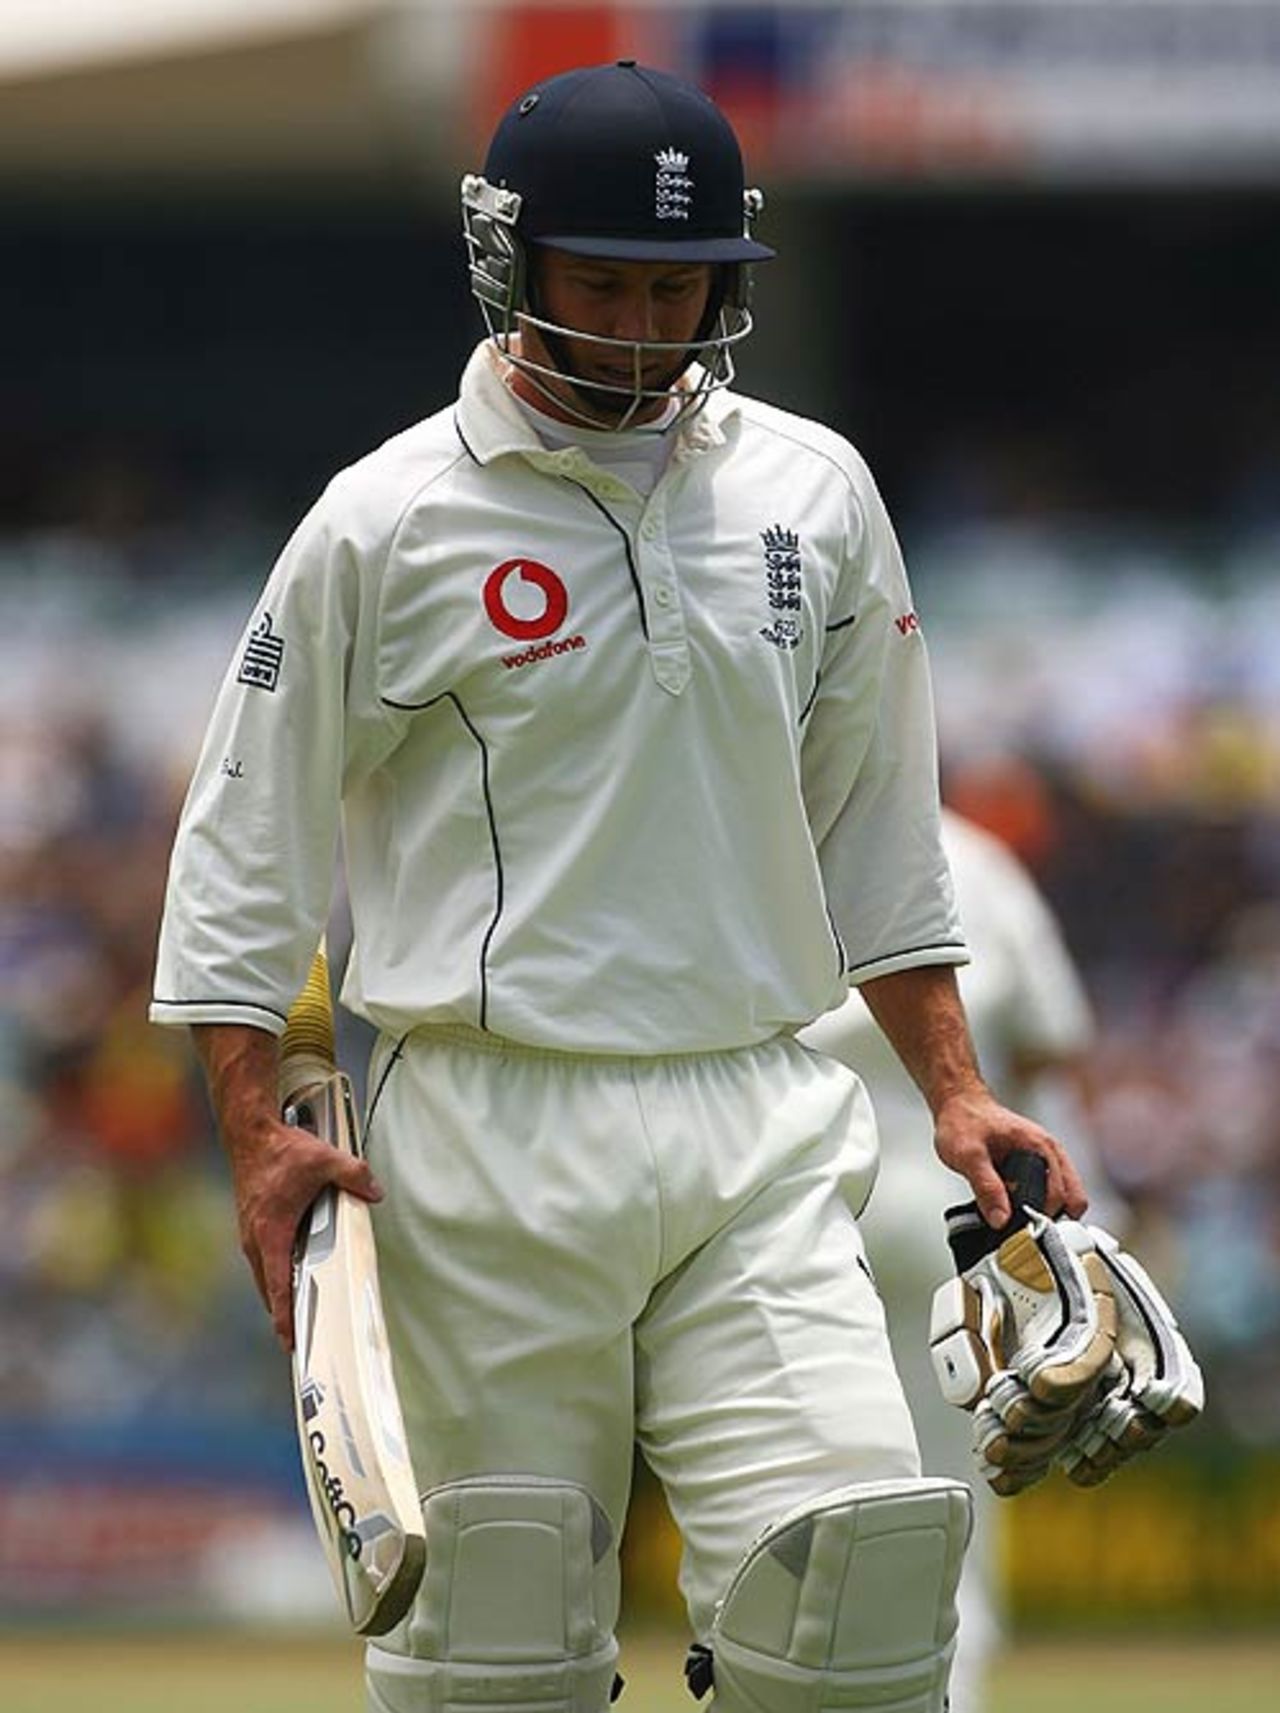 Geraint Jones makes his way back to the pavilion after being run out for 0, Australia v England, 3rd Test, Perth, December 18, 2006